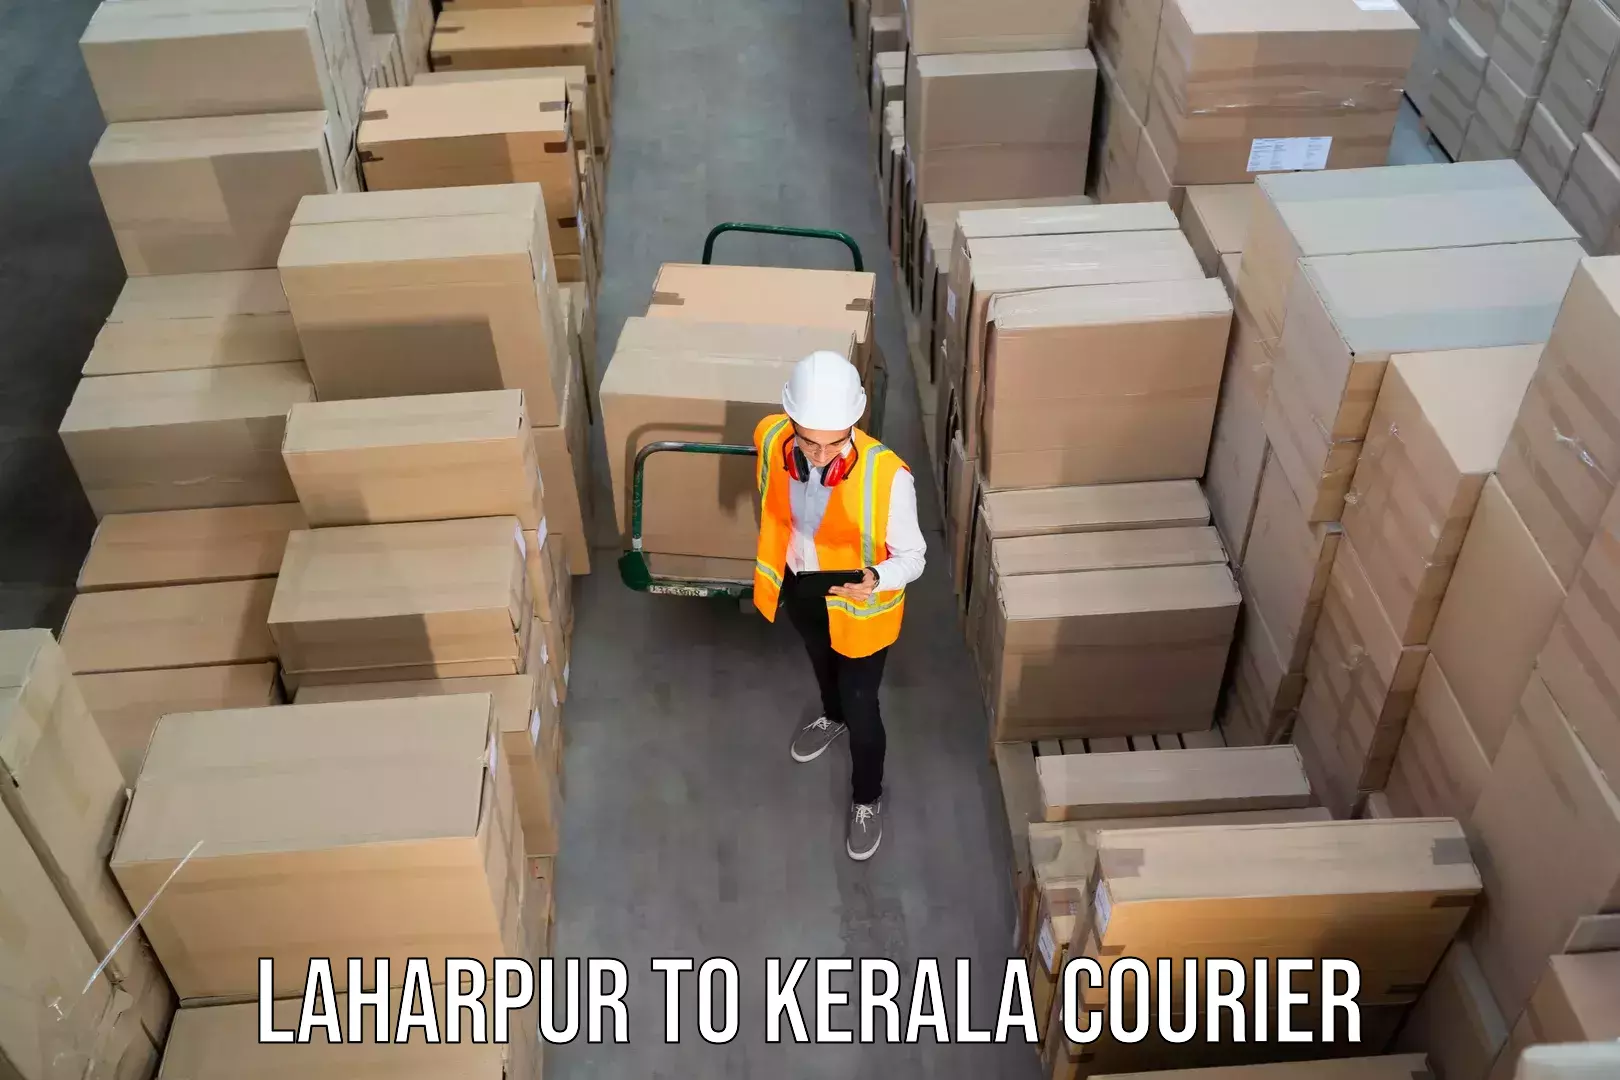 Business delivery service Laharpur to Palai